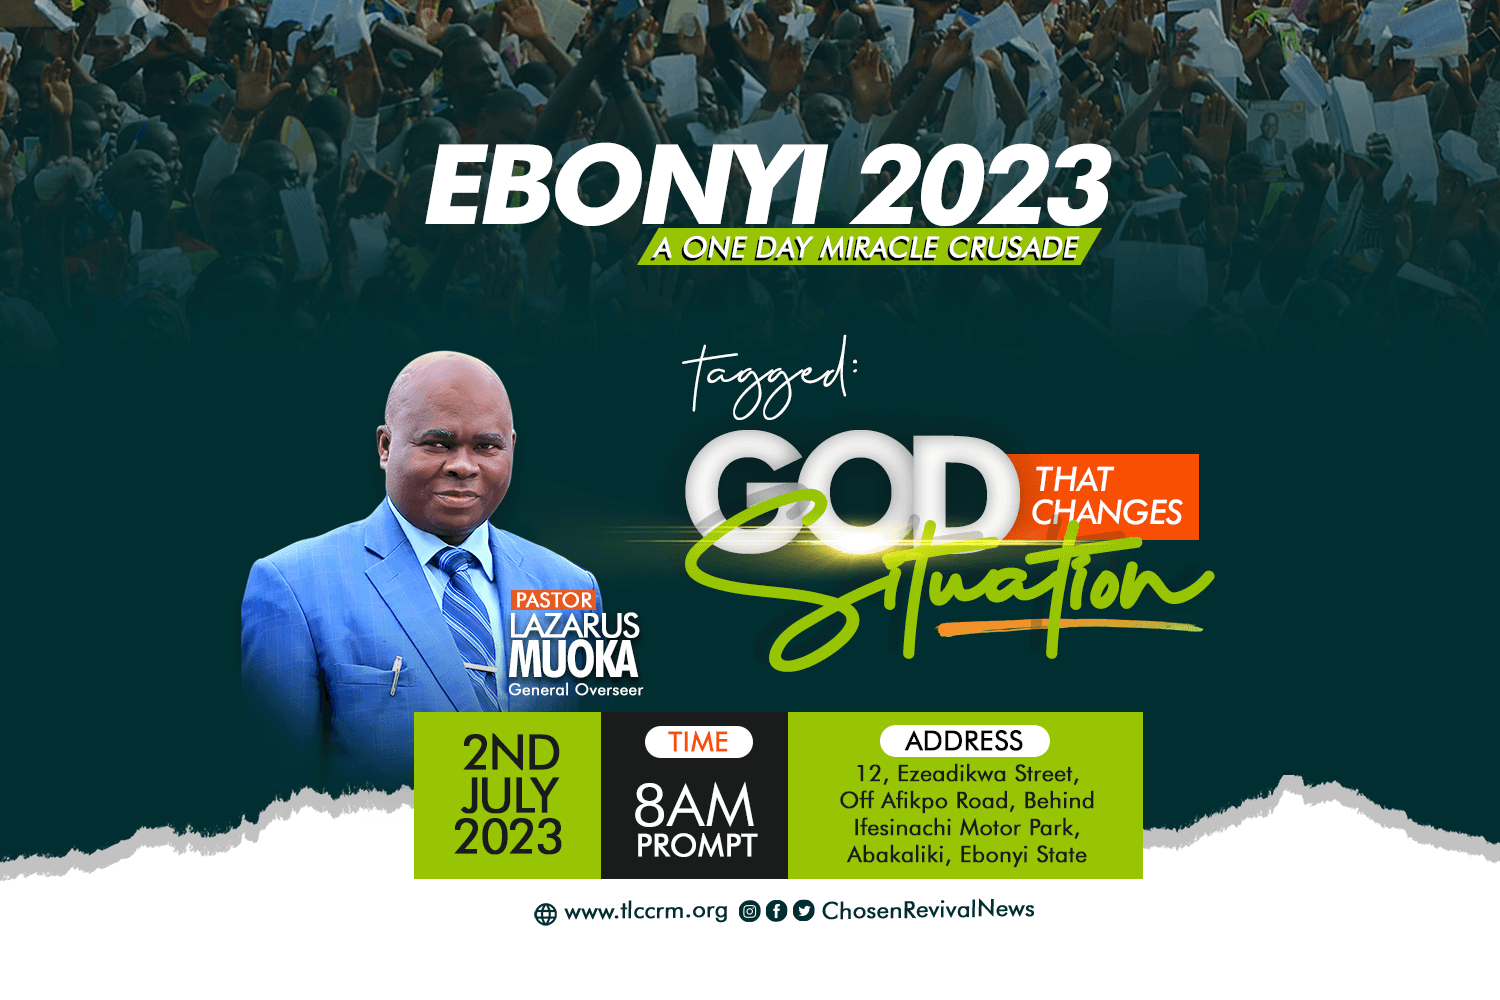 Ebonyi State Crusade 2023 - The God That Changes Situation